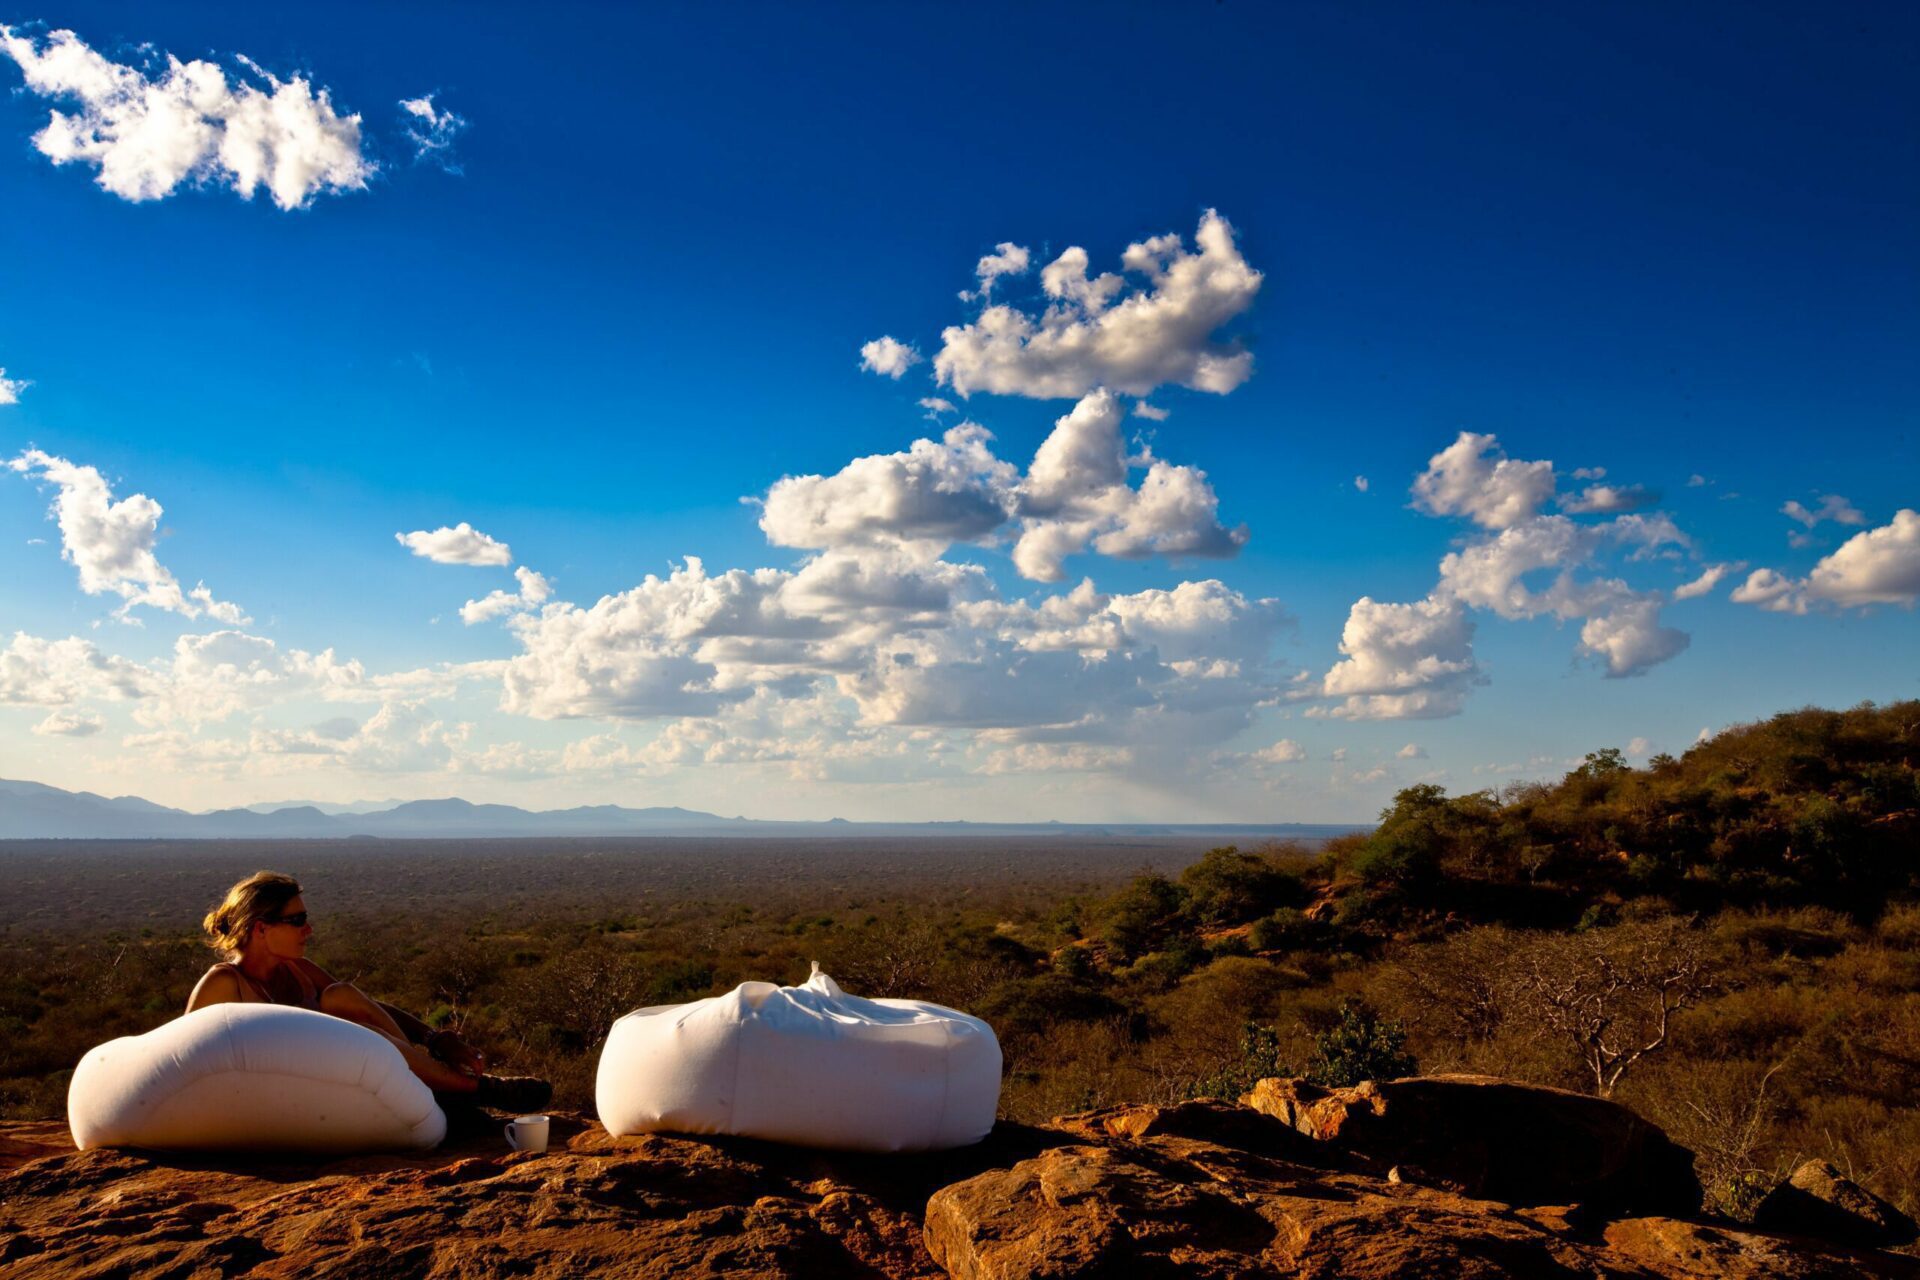 perfect blue sky with fluffy white clouds and two white bean bags set up to enjoy drinks.